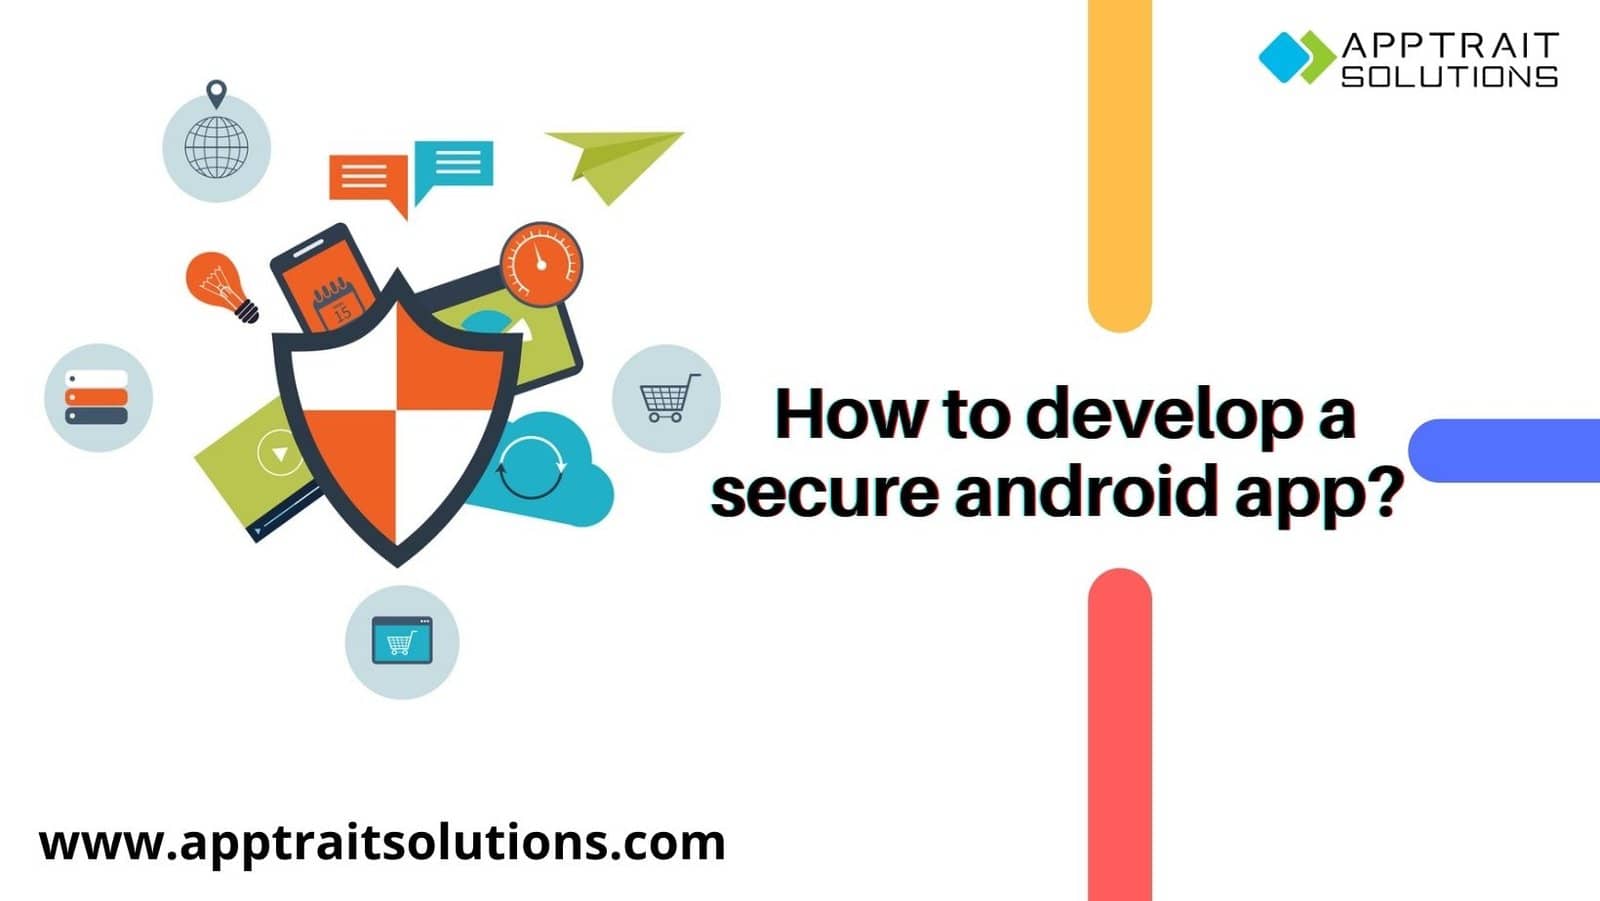 How to develop a secure mobile app?